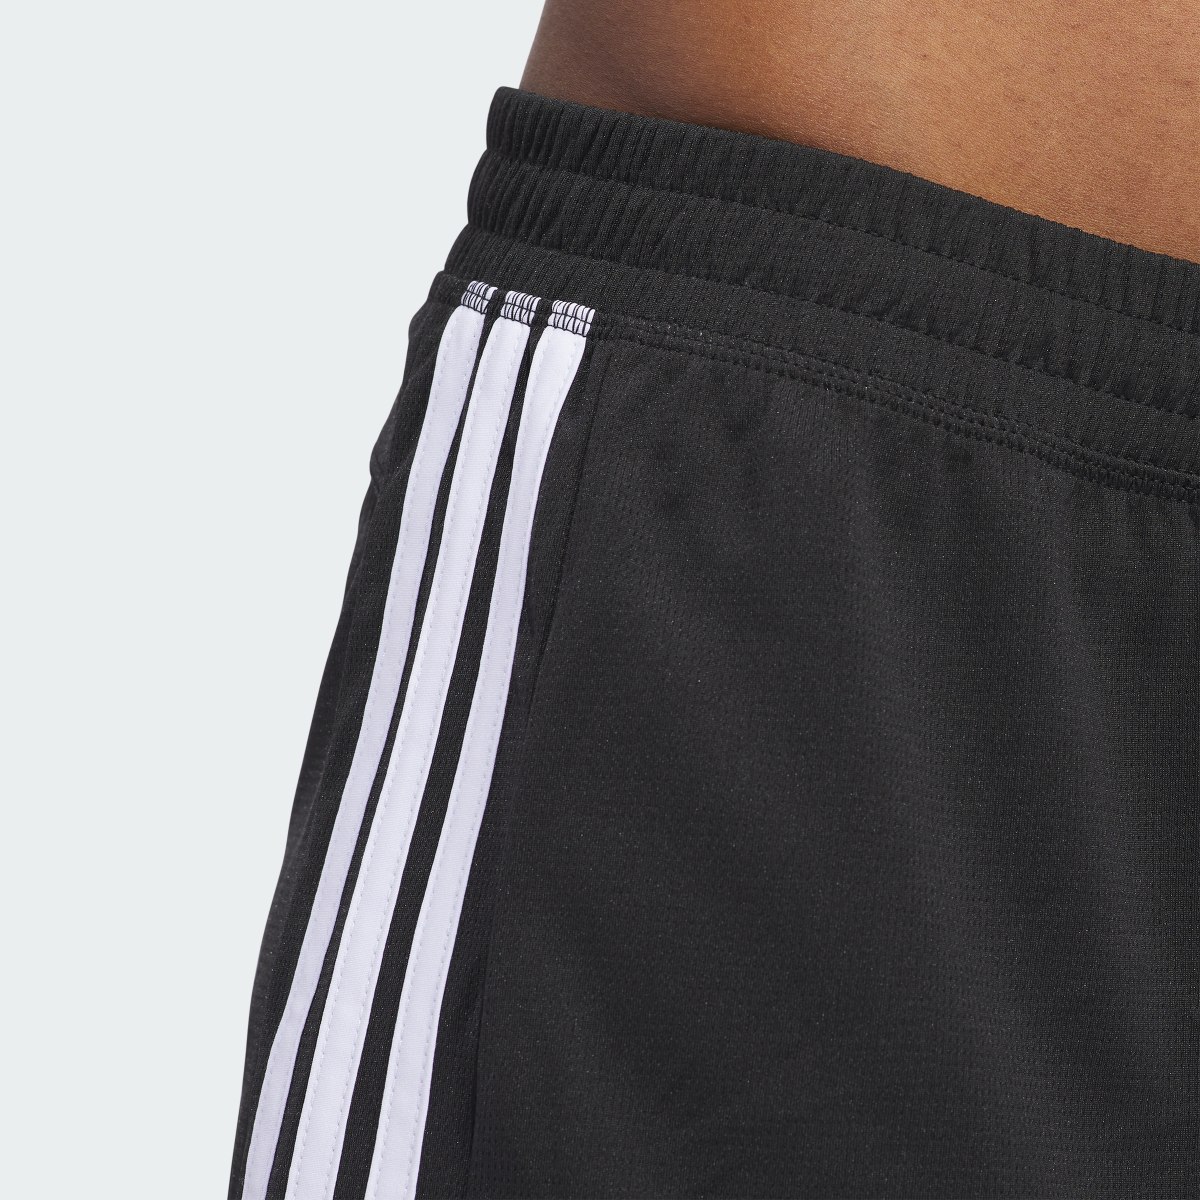 Adidas Pacer 3-Stripes Knit Shorts. 7